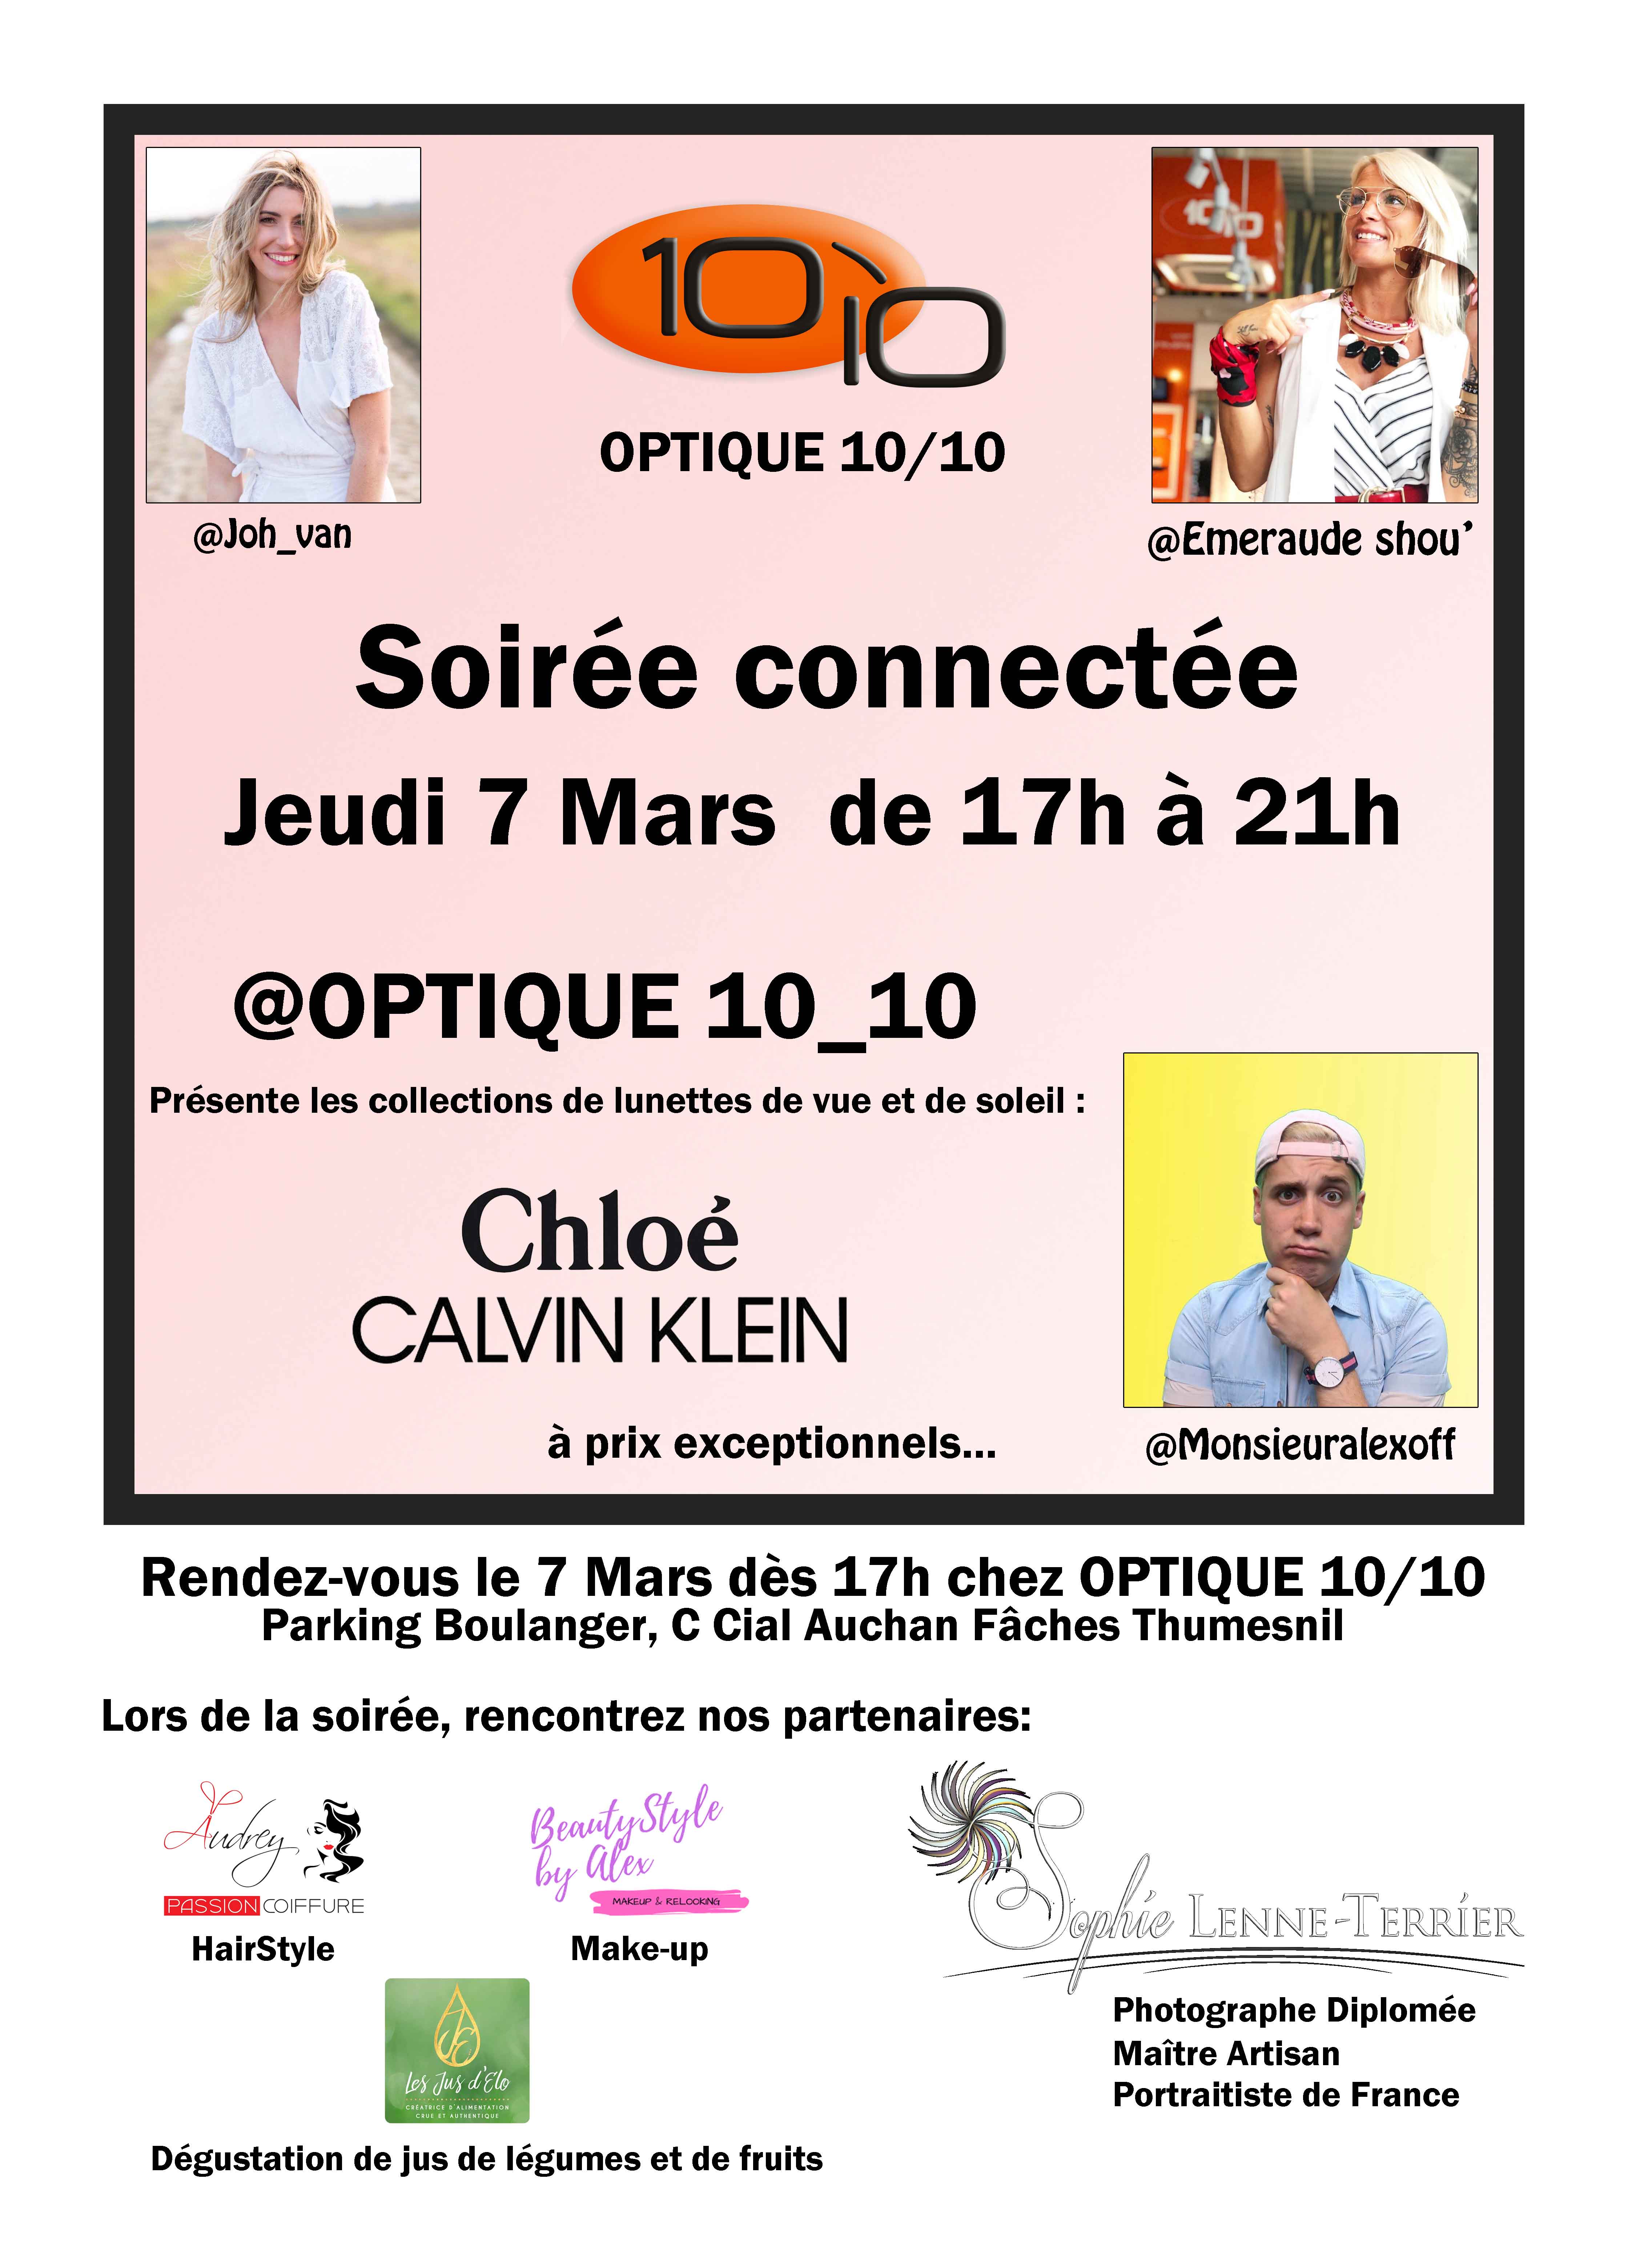 SOIREE CONNECTEE OPTIQUE 10/10 Fâches Thumesnil